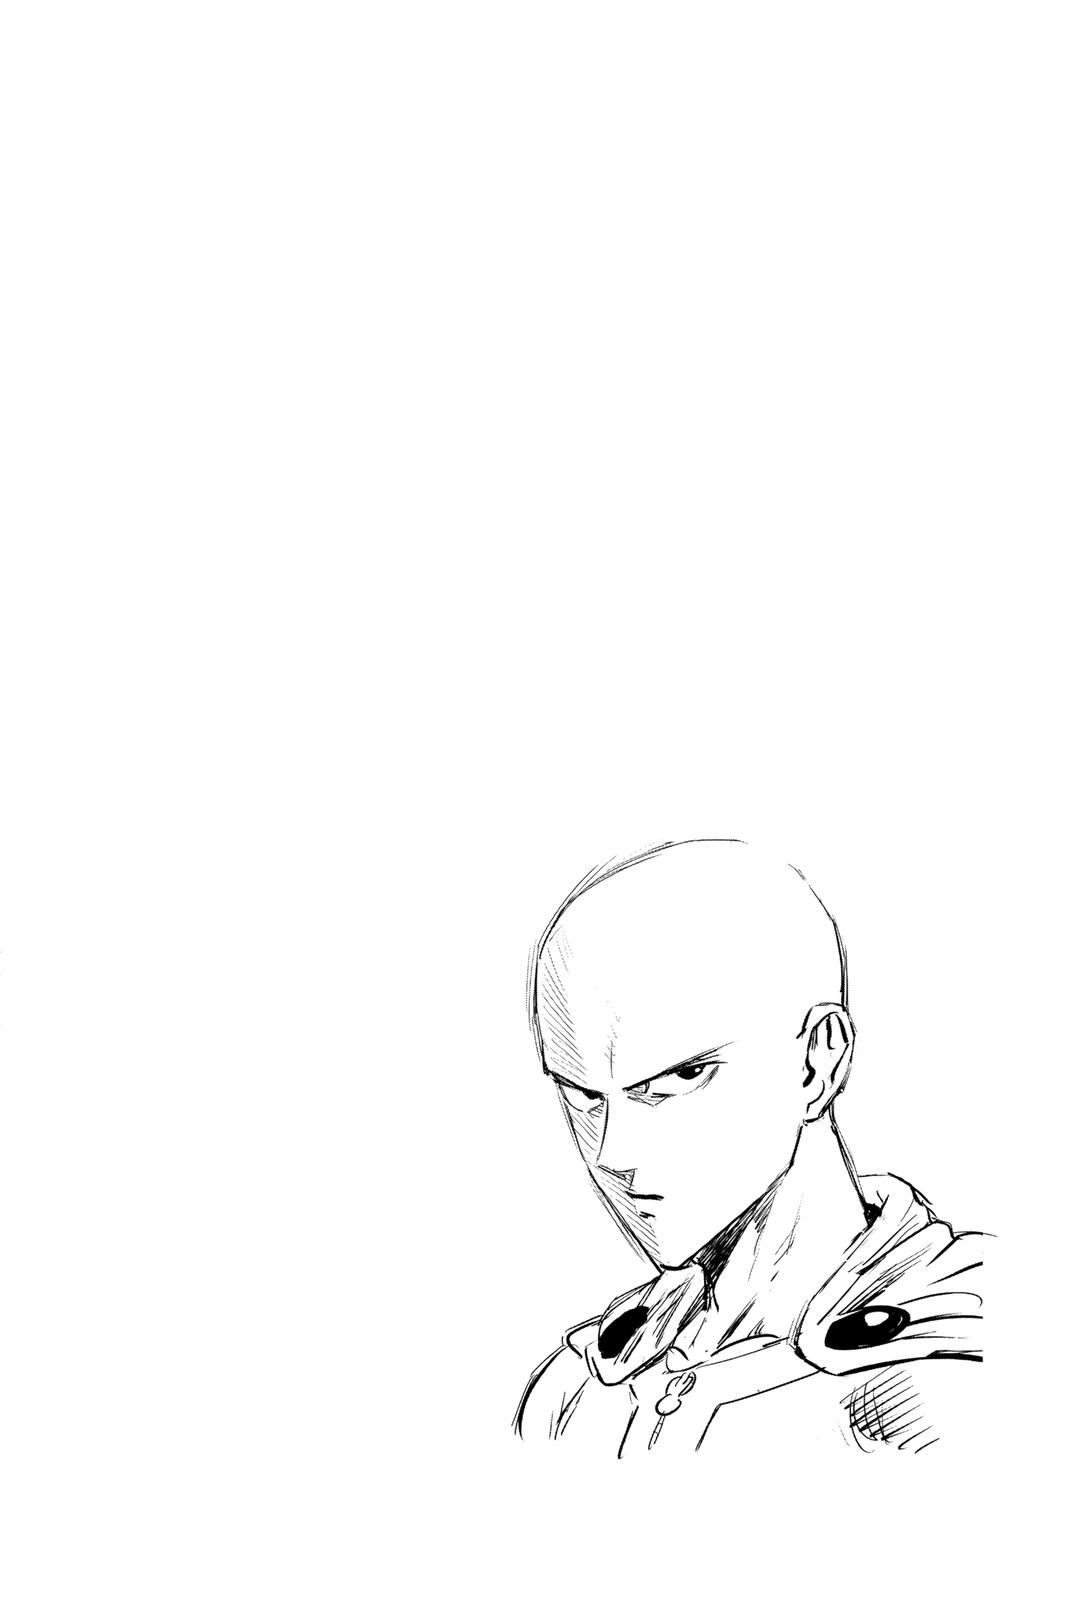 One-Punch Man, Punch 121 image 22